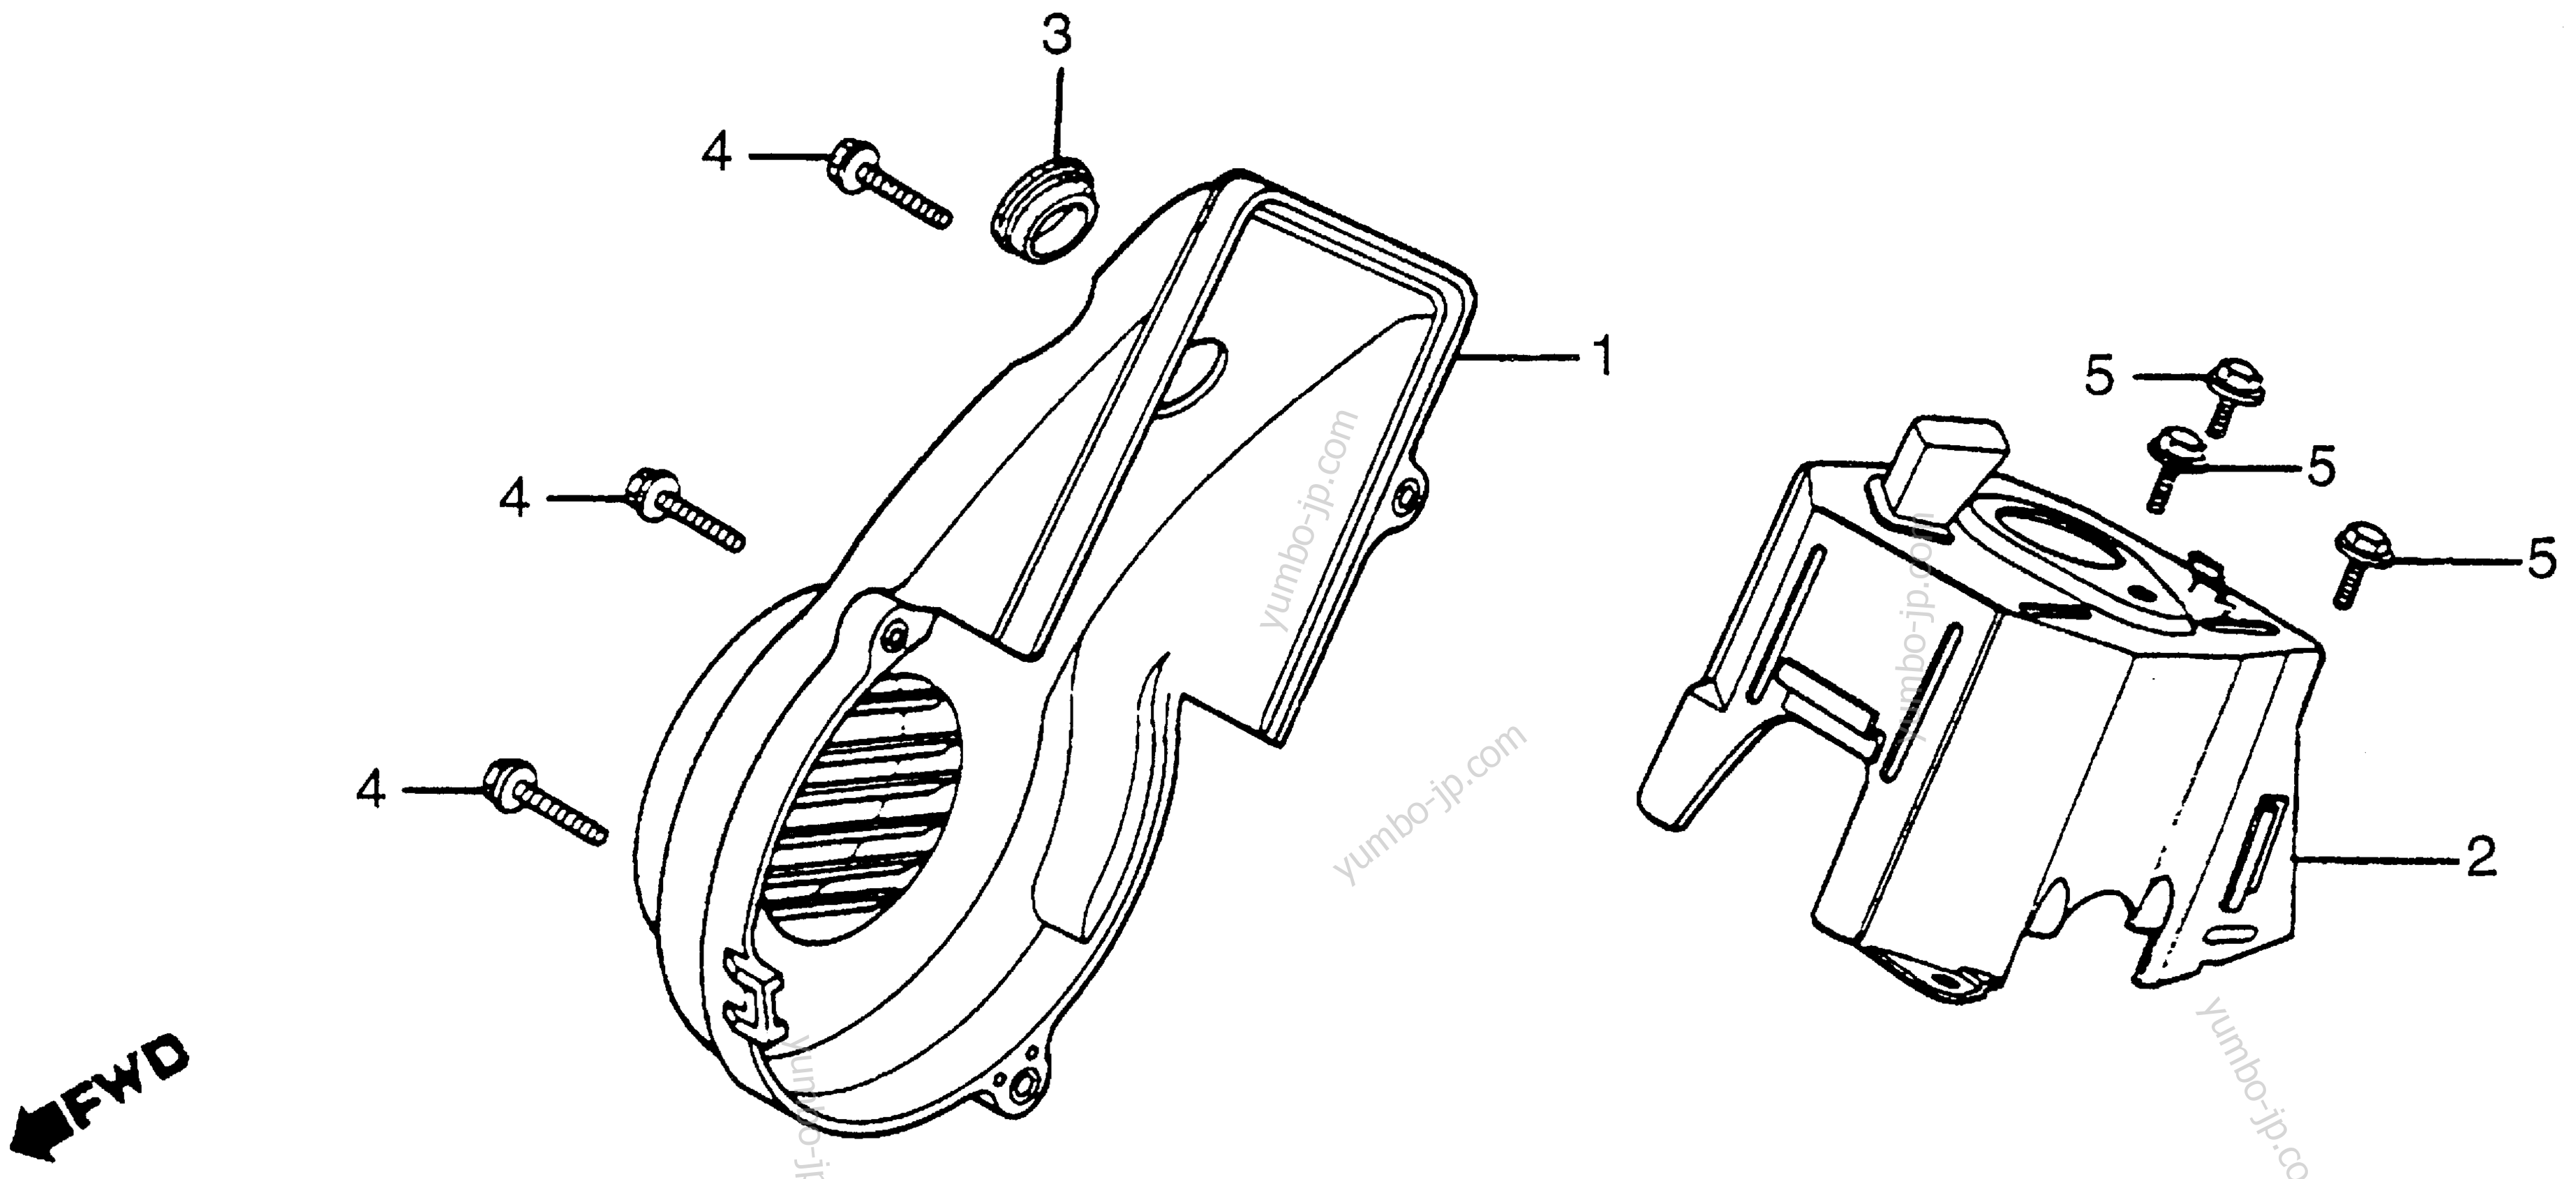 FAN COVER / SHROUD AIR GUIDE COVER / CYLINDER / for scooters HONDA NH125 A 1984 year